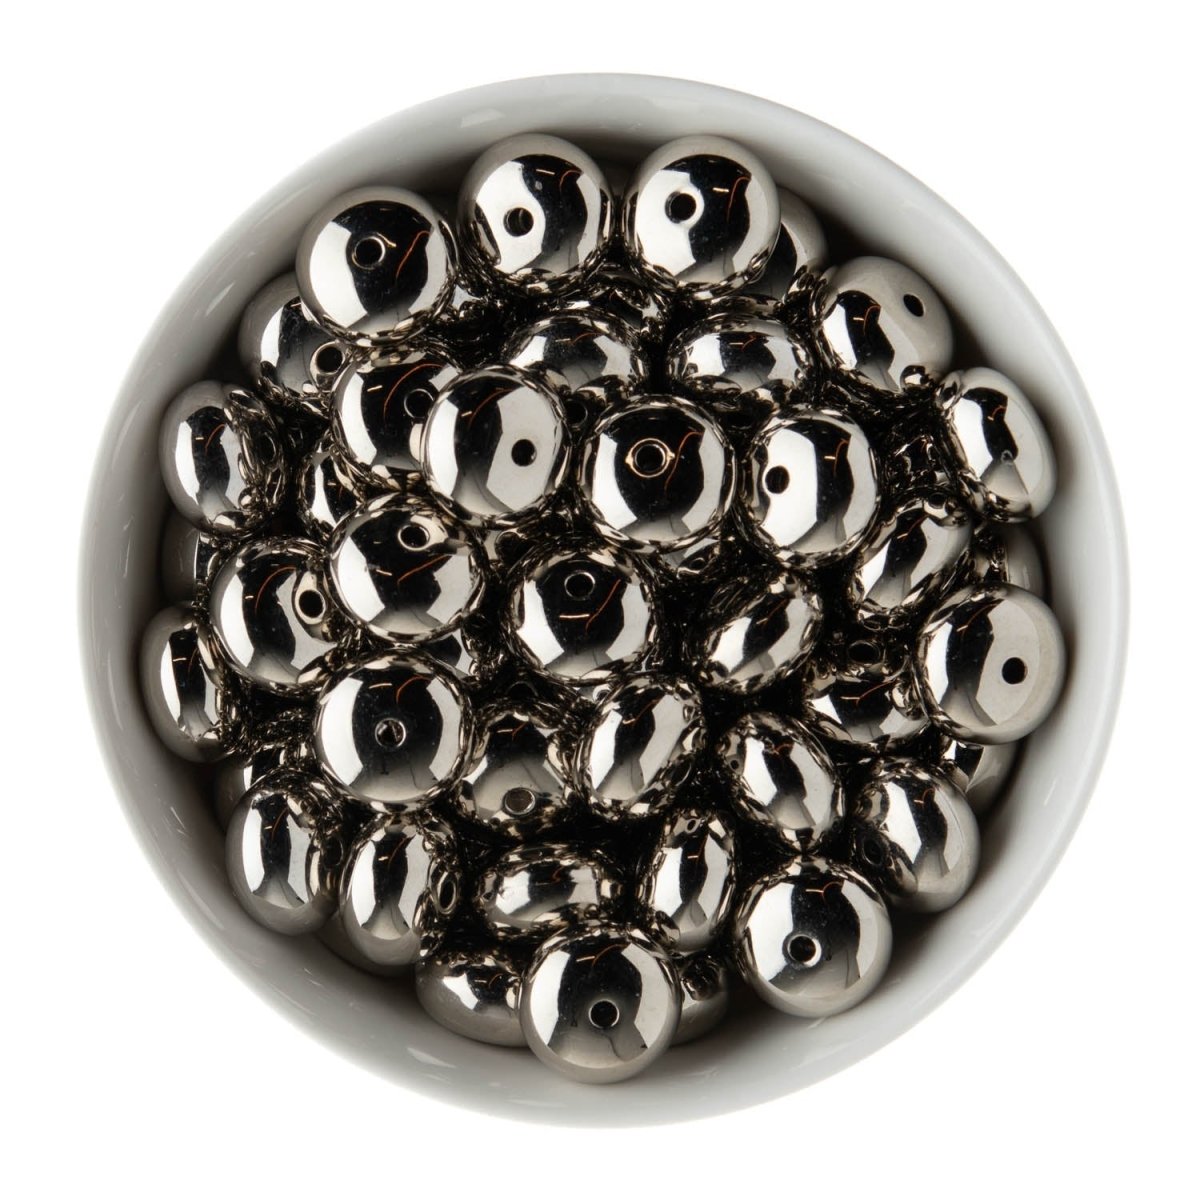 Spacer Beads Abacus 18mm Silver from Cara & Co Craft Supply